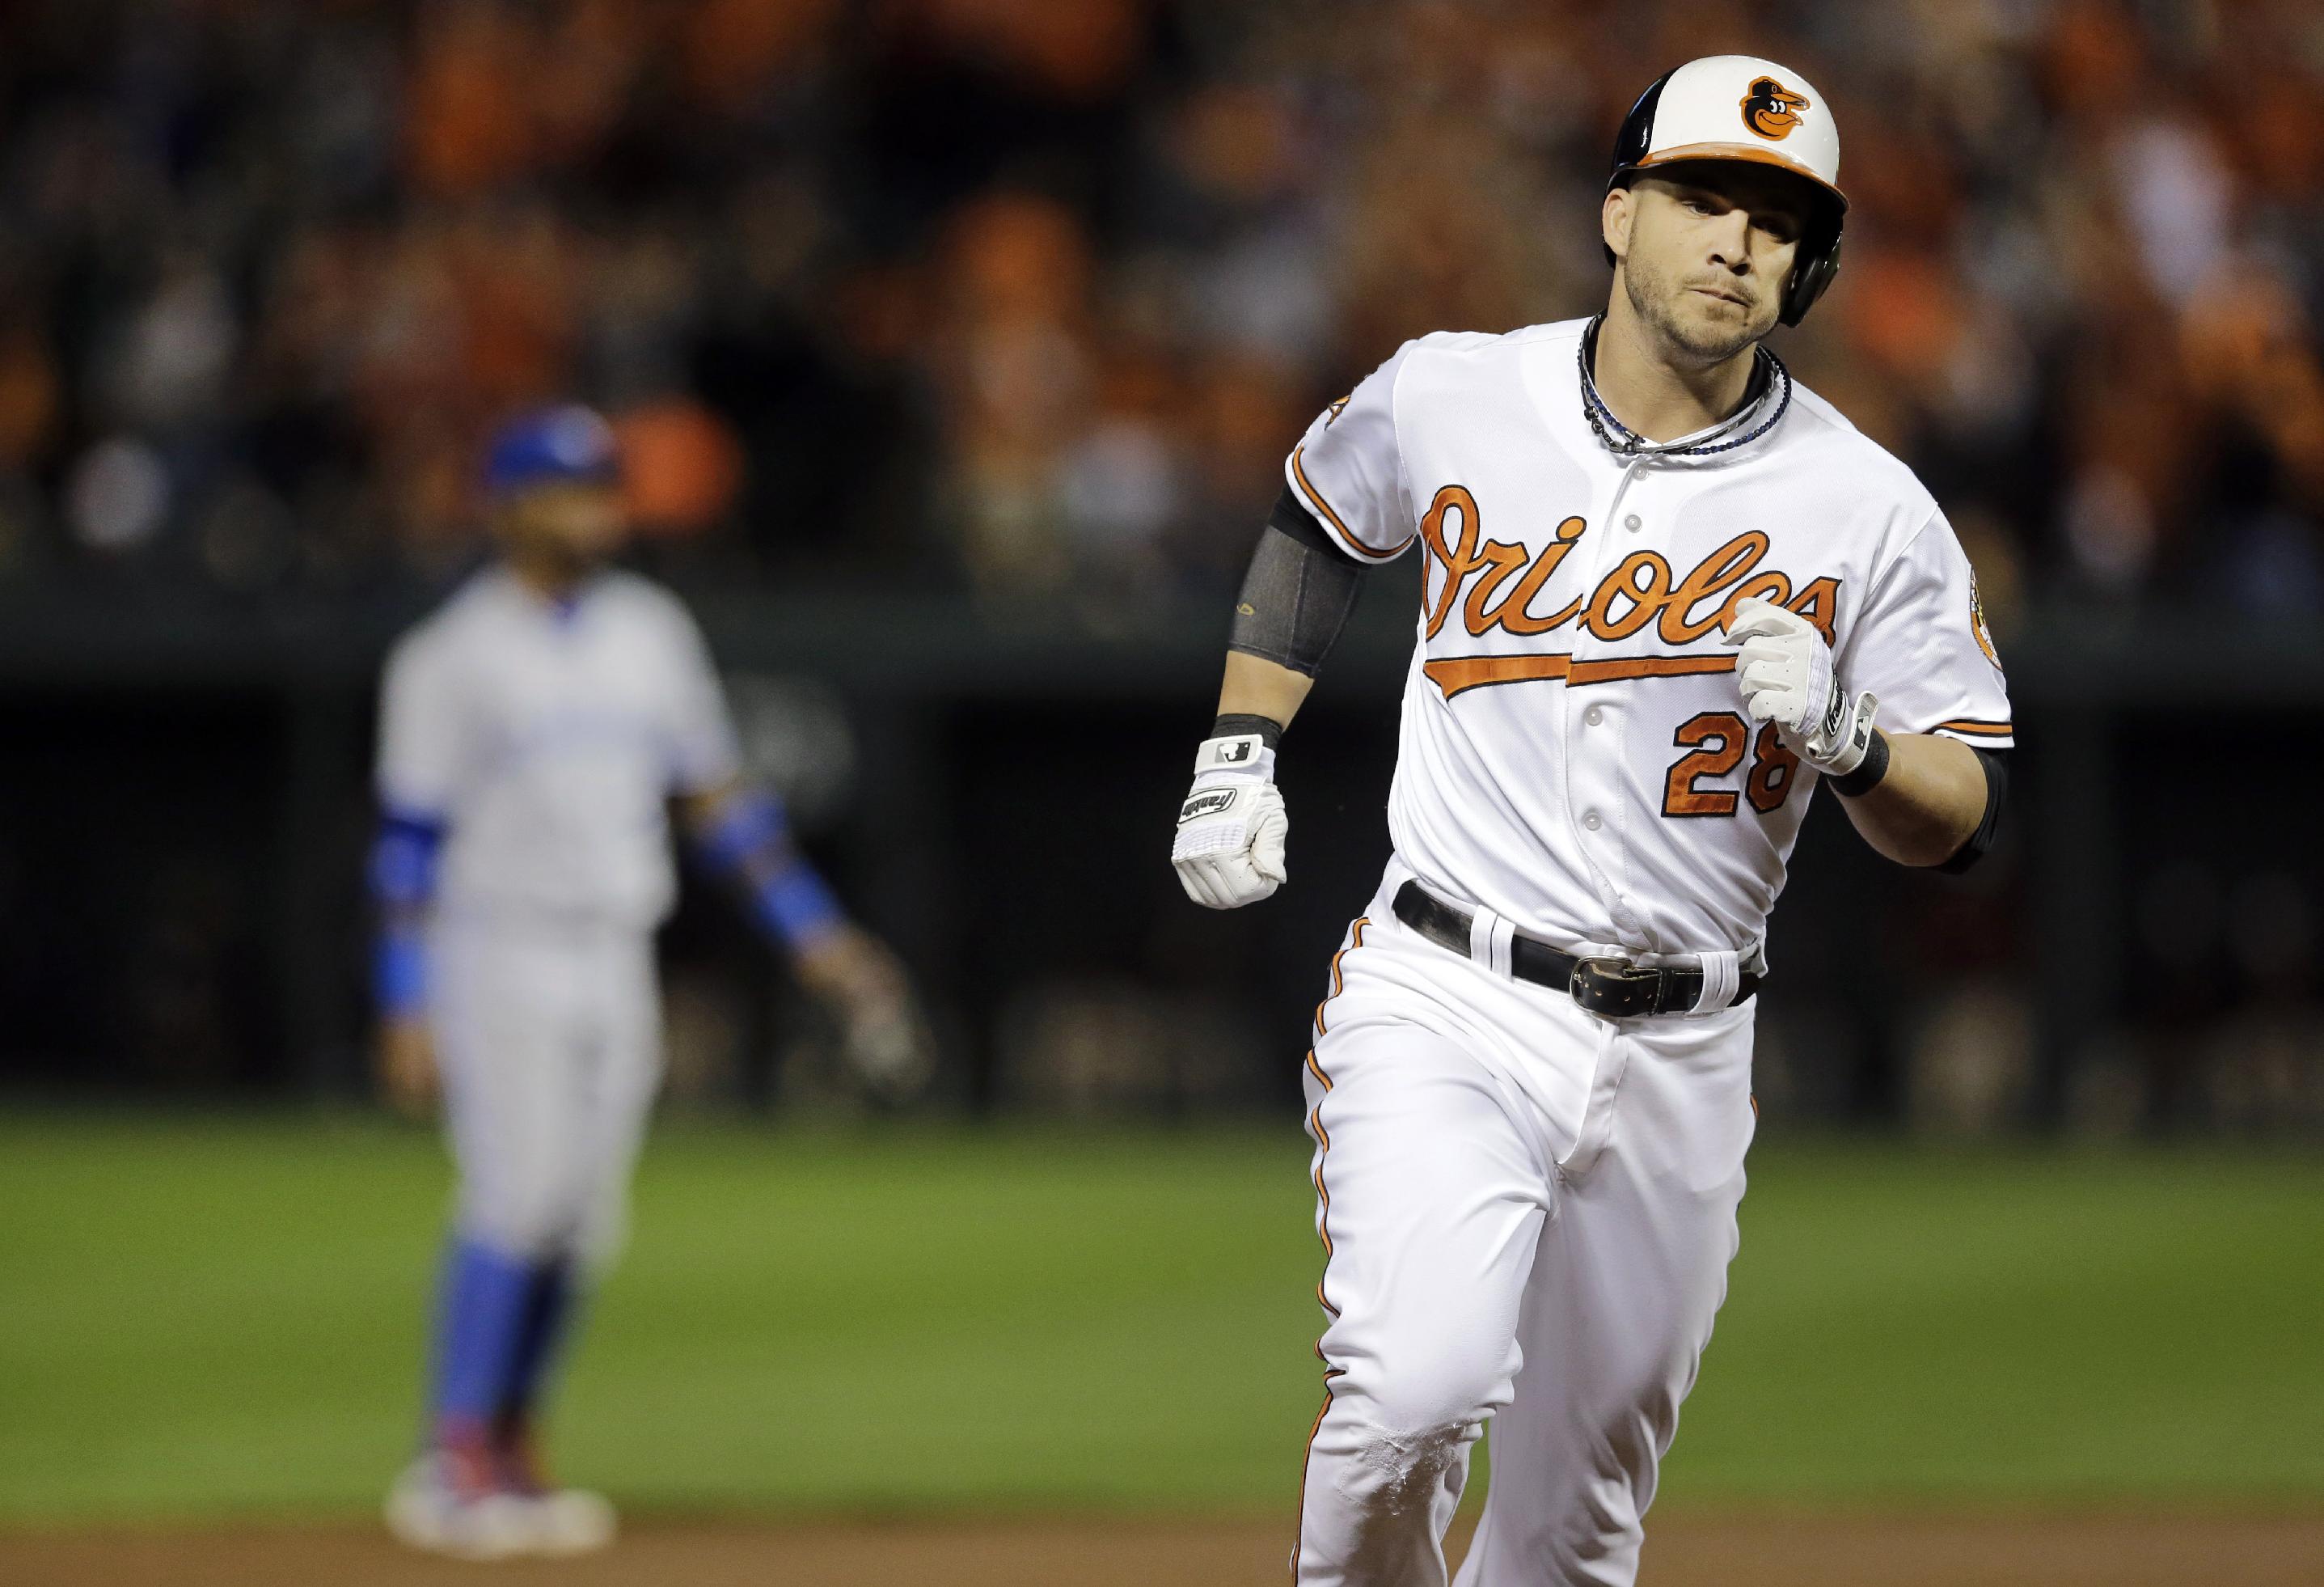 The Orioles have relied heavily on role players such as Steve Pearce. He's come up big. (AP)